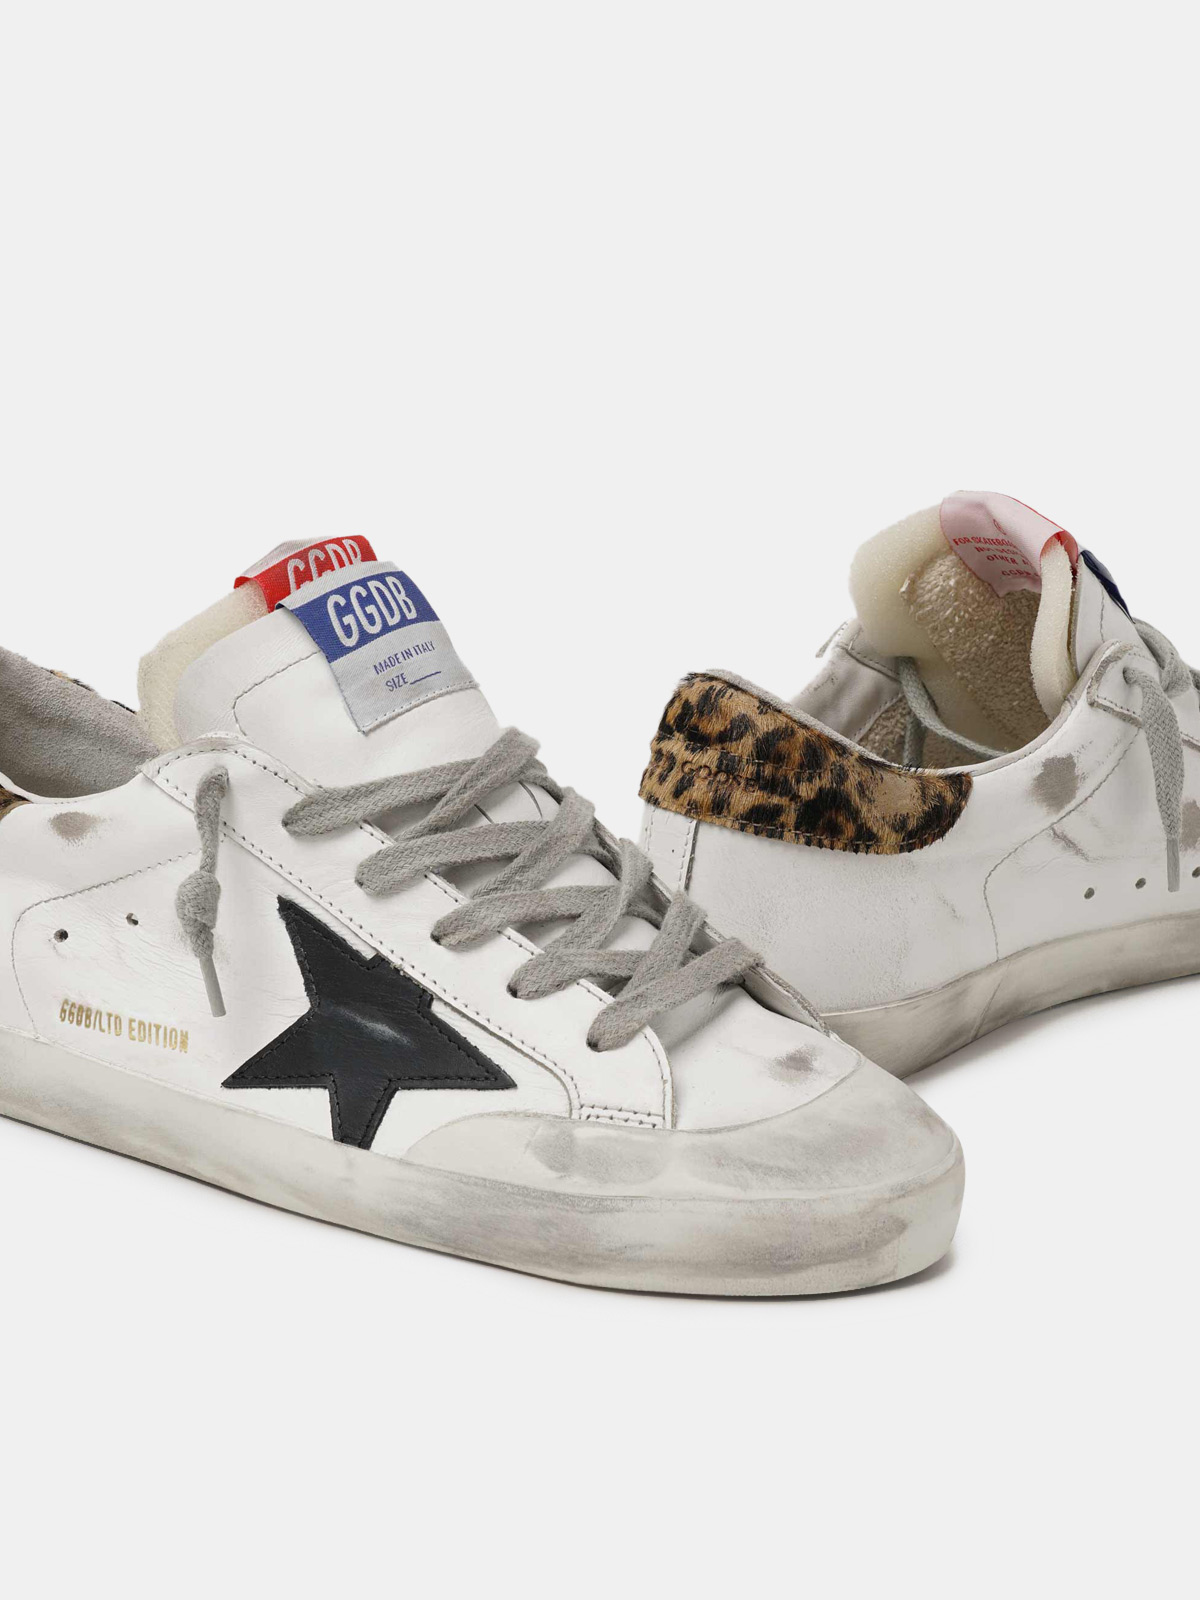 Womenâ€™s LAB Limited Edition Super-Star sneakers with double tongue and